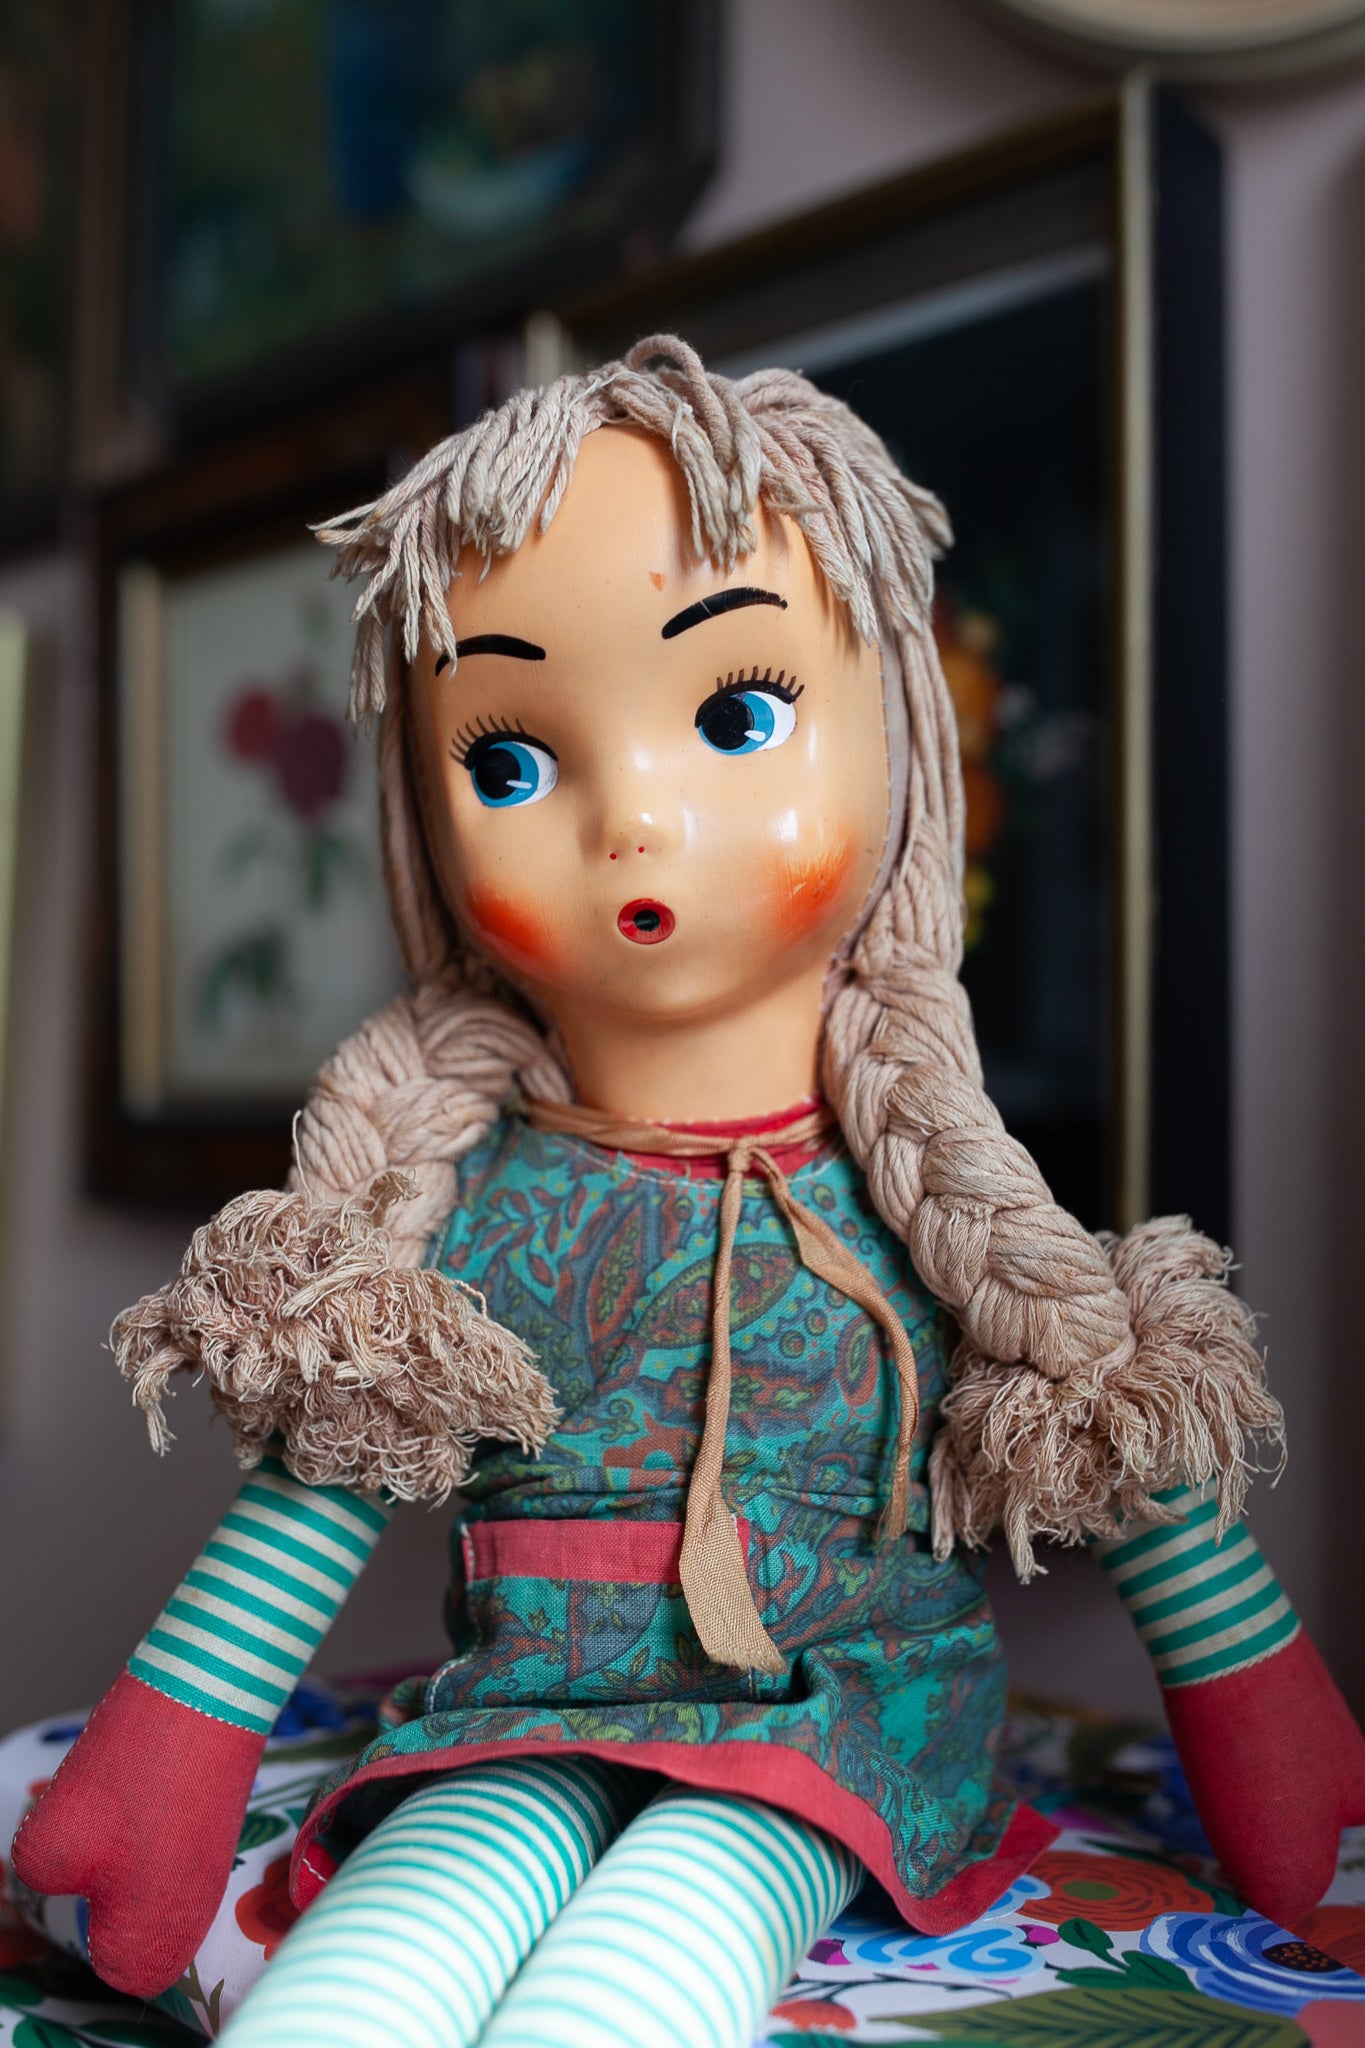 Vintage Doll - Rag Doll With Mask Face -Doll